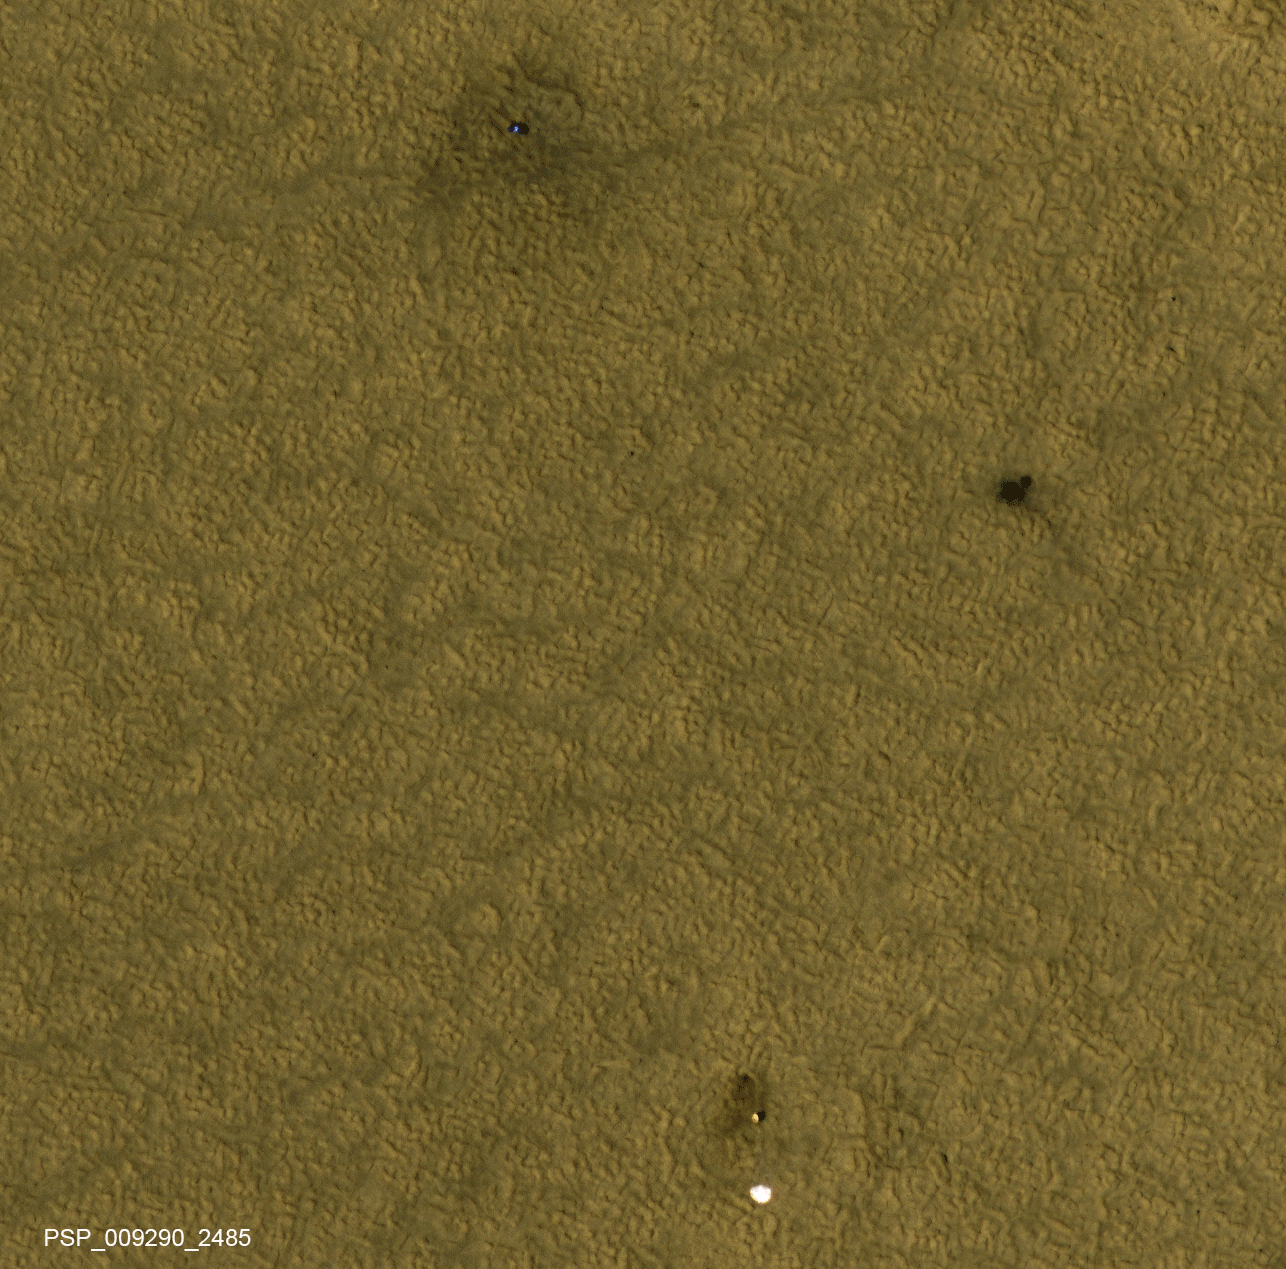  Three patches of darker ground -- where landing events removed dust